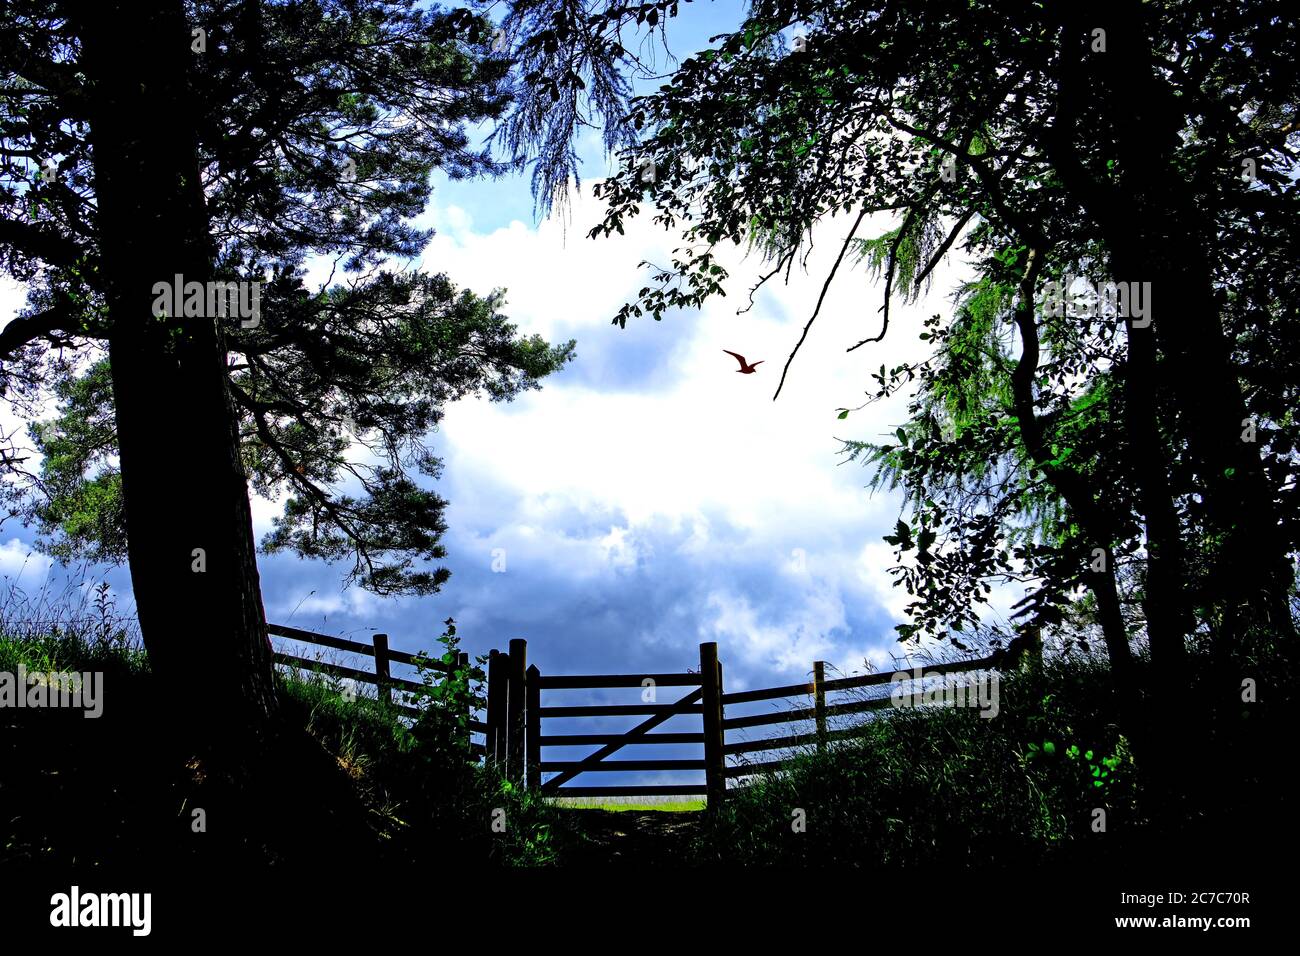 Old wooden meadow gate trees and cumulus sky with bird Stock Photo